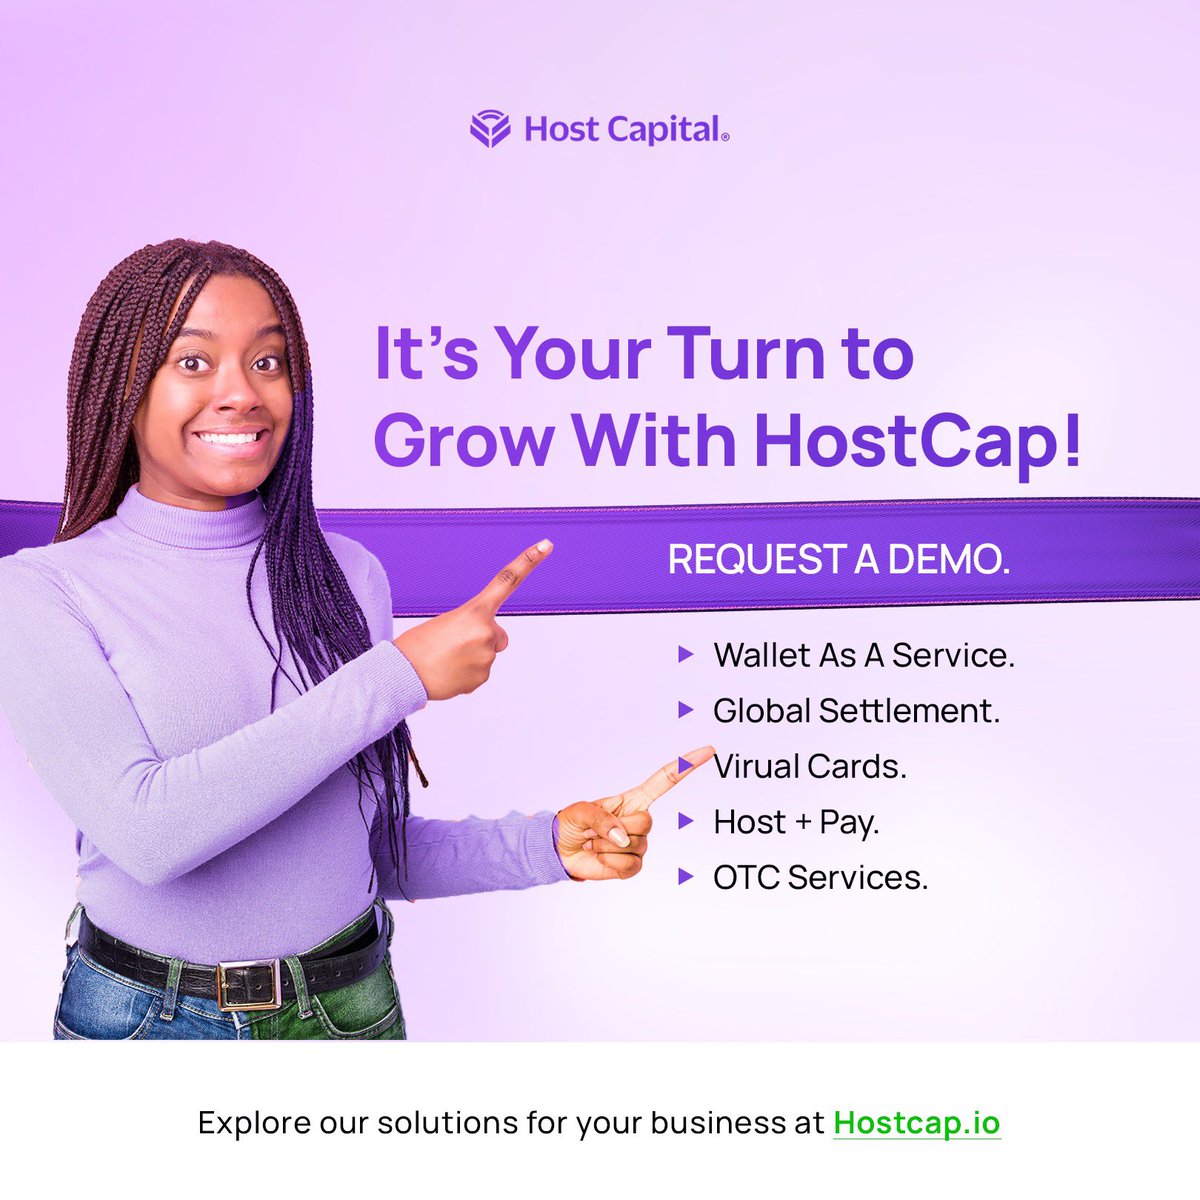 Let’s help you increase your business revenue at Host Capital. 

Smart entrepreneurs follow us for key business insights, tips and solutions to maximise growth.
You should too! 😉

#HostCap #HostCapital #GlobalSettlement #FinancialManagement #GlobalFinance